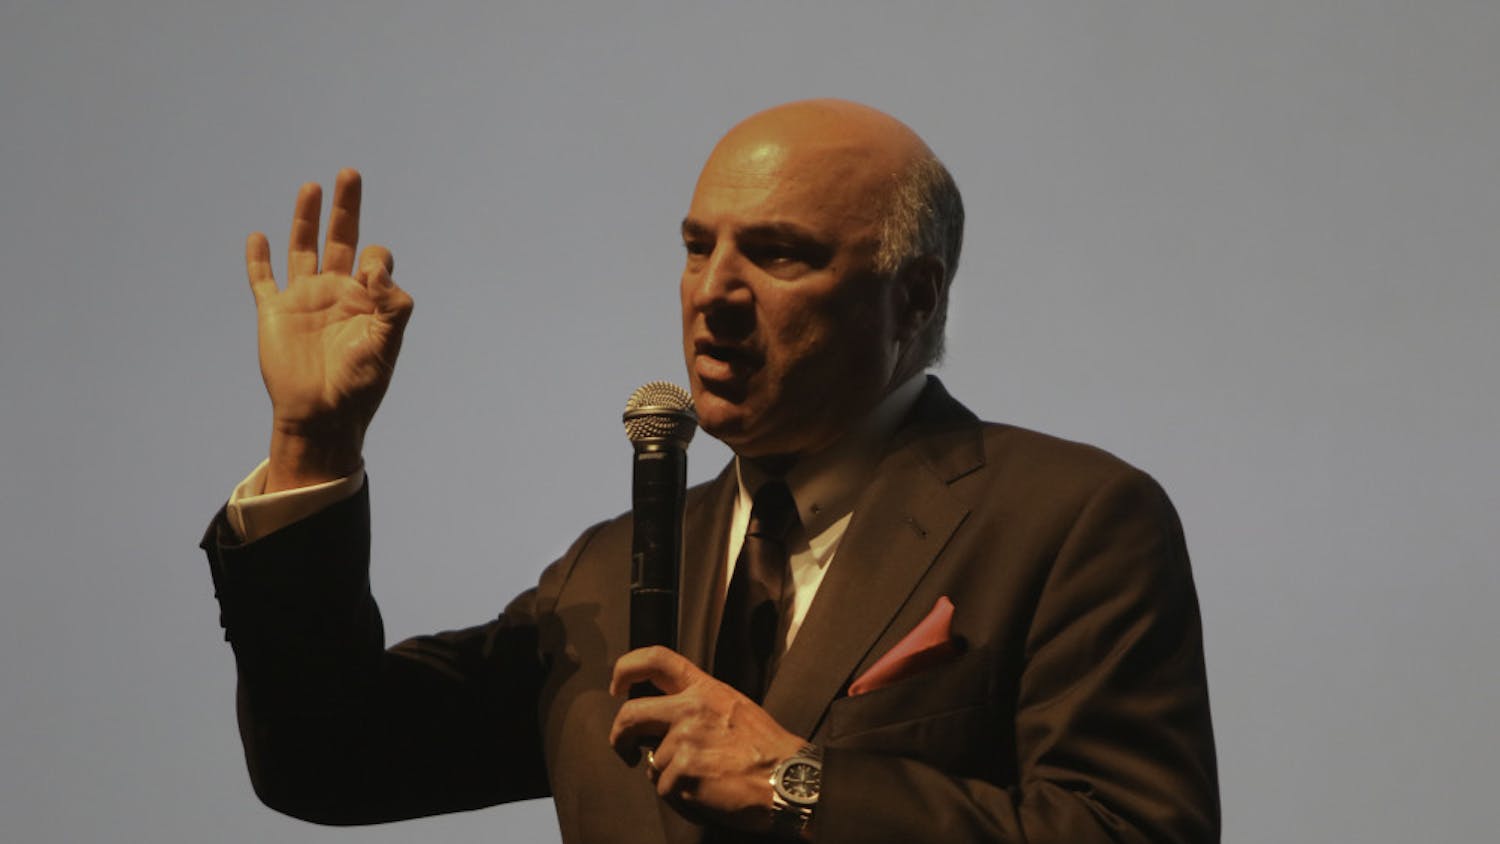 Kevin O’Leary, the 64-year-old businessman and star of the television show “Shark Tank,” speaks Monday to a packed auditorium at the Phillips Center for the Performing Arts at UF. O’Leary used clips from the television show during the presentation and took questions from the audience at the end.